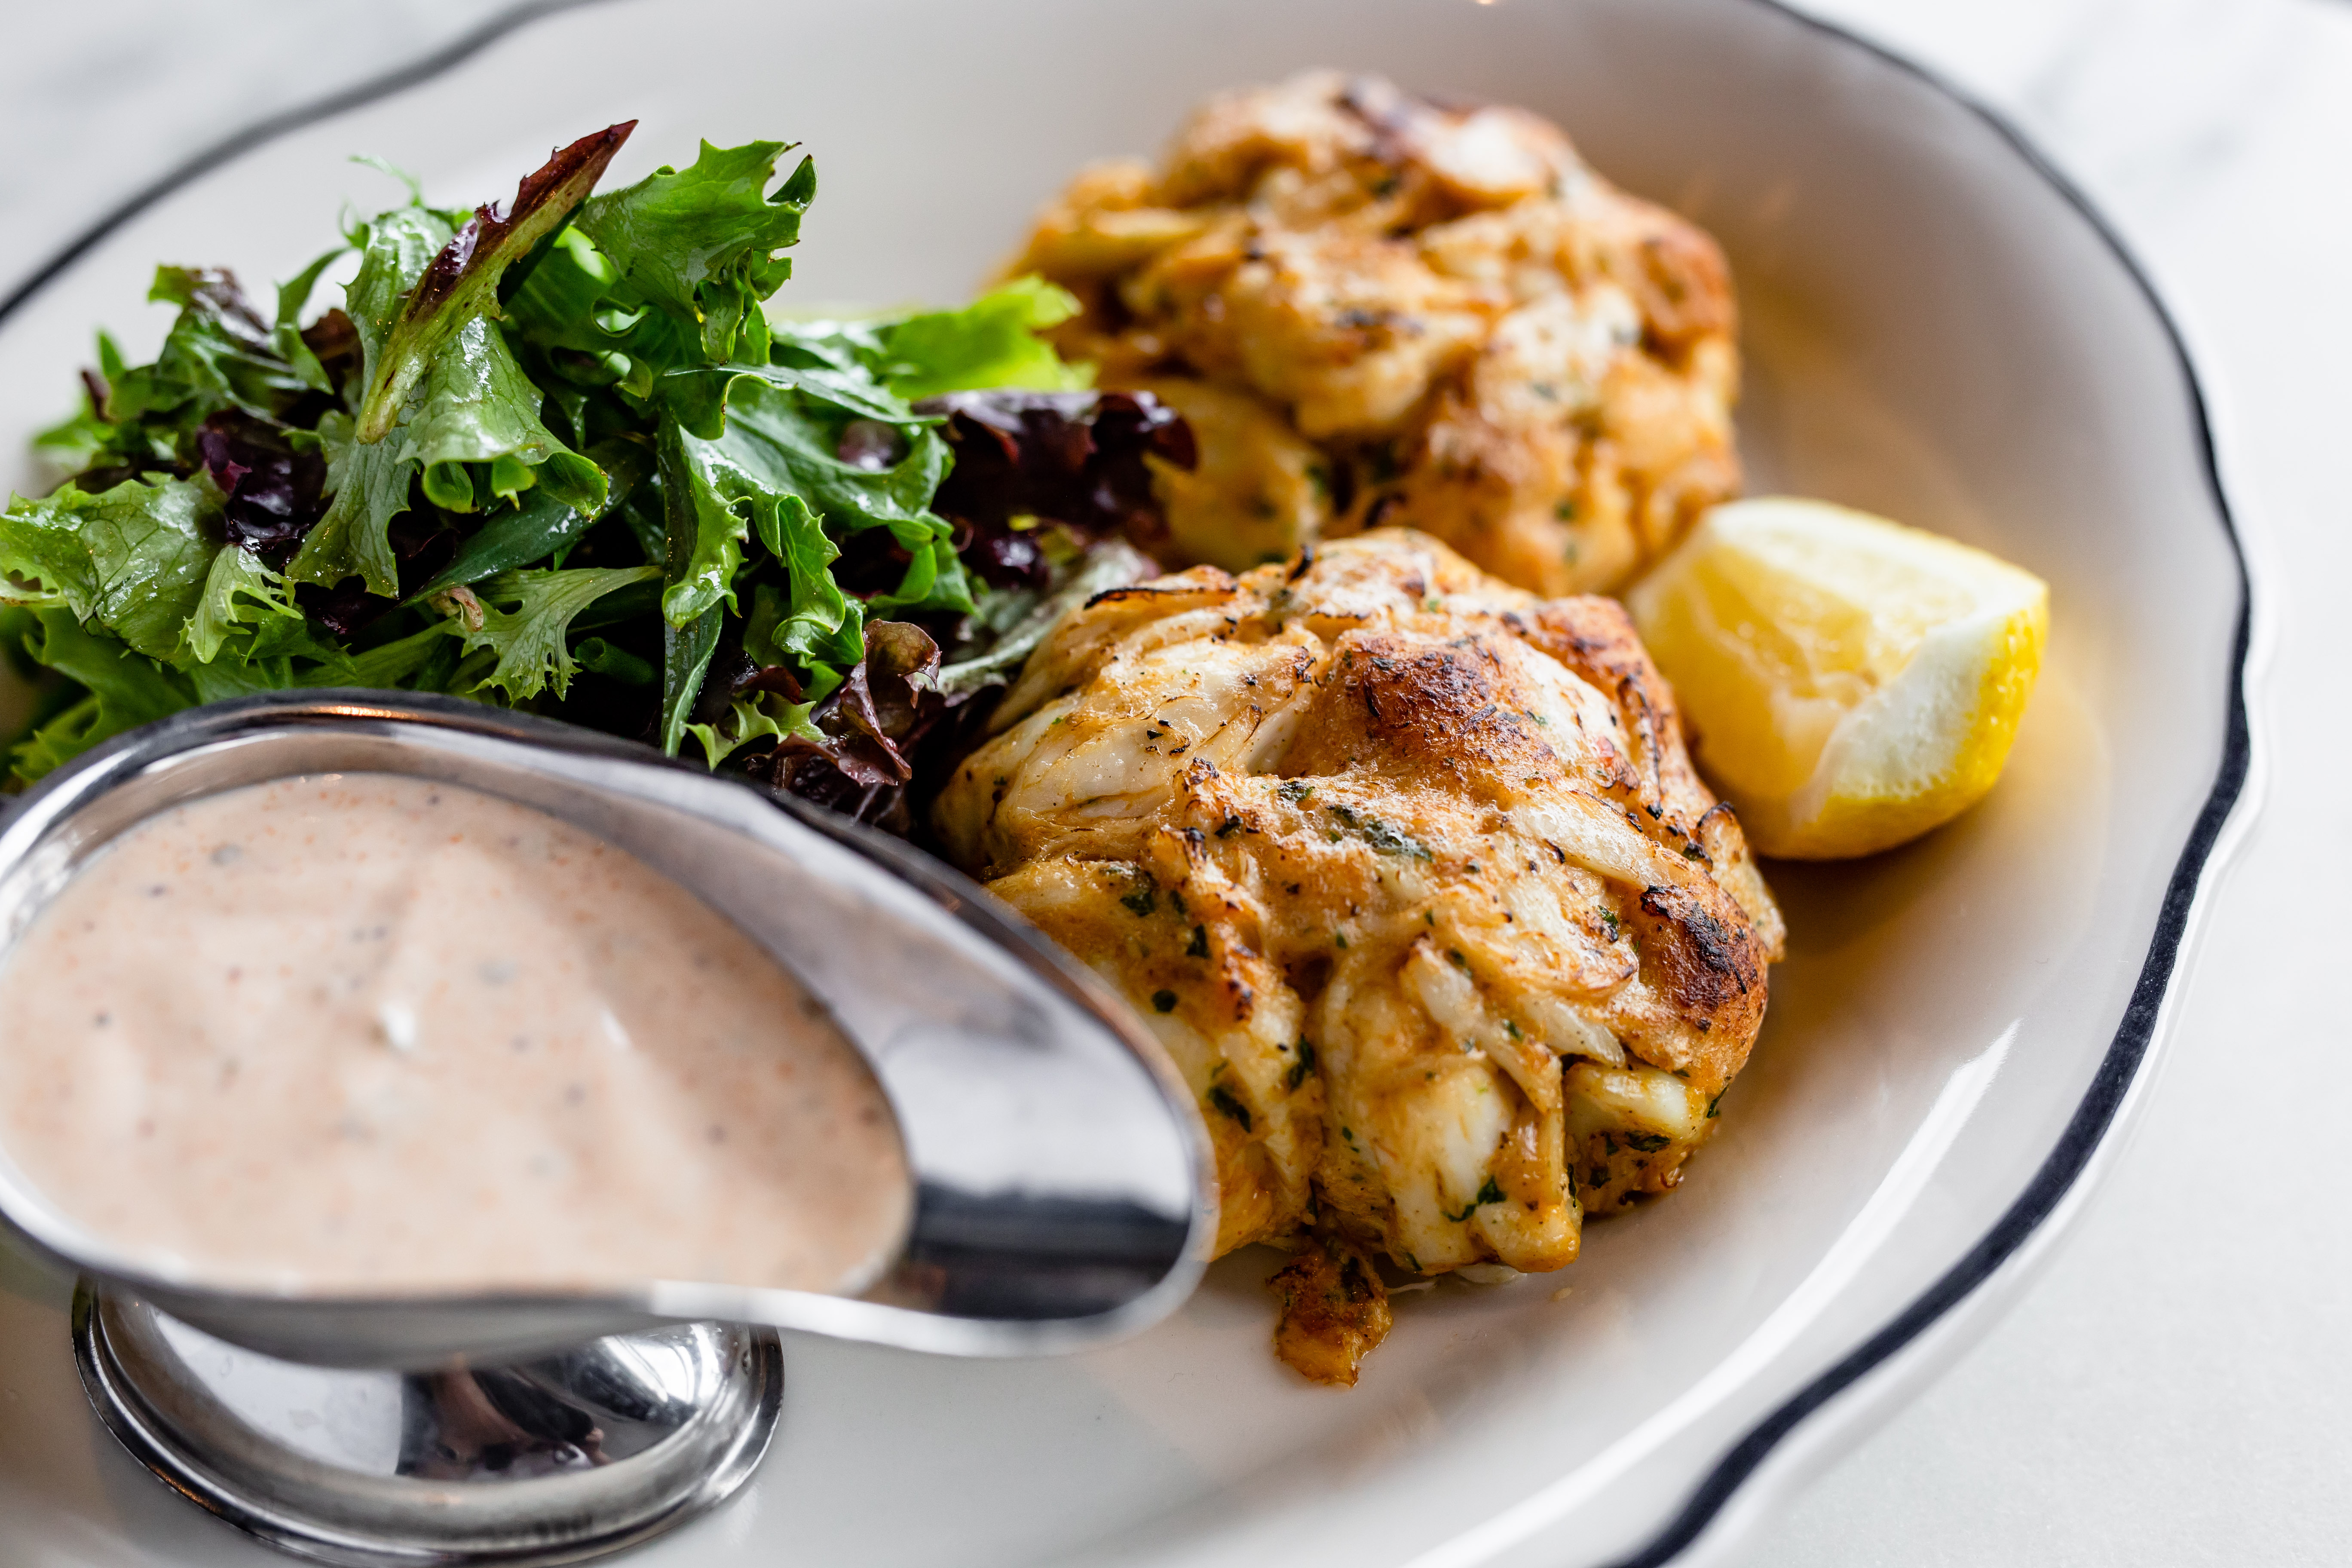 A plate of two crab cakes with a lemon and remoulade sauce.